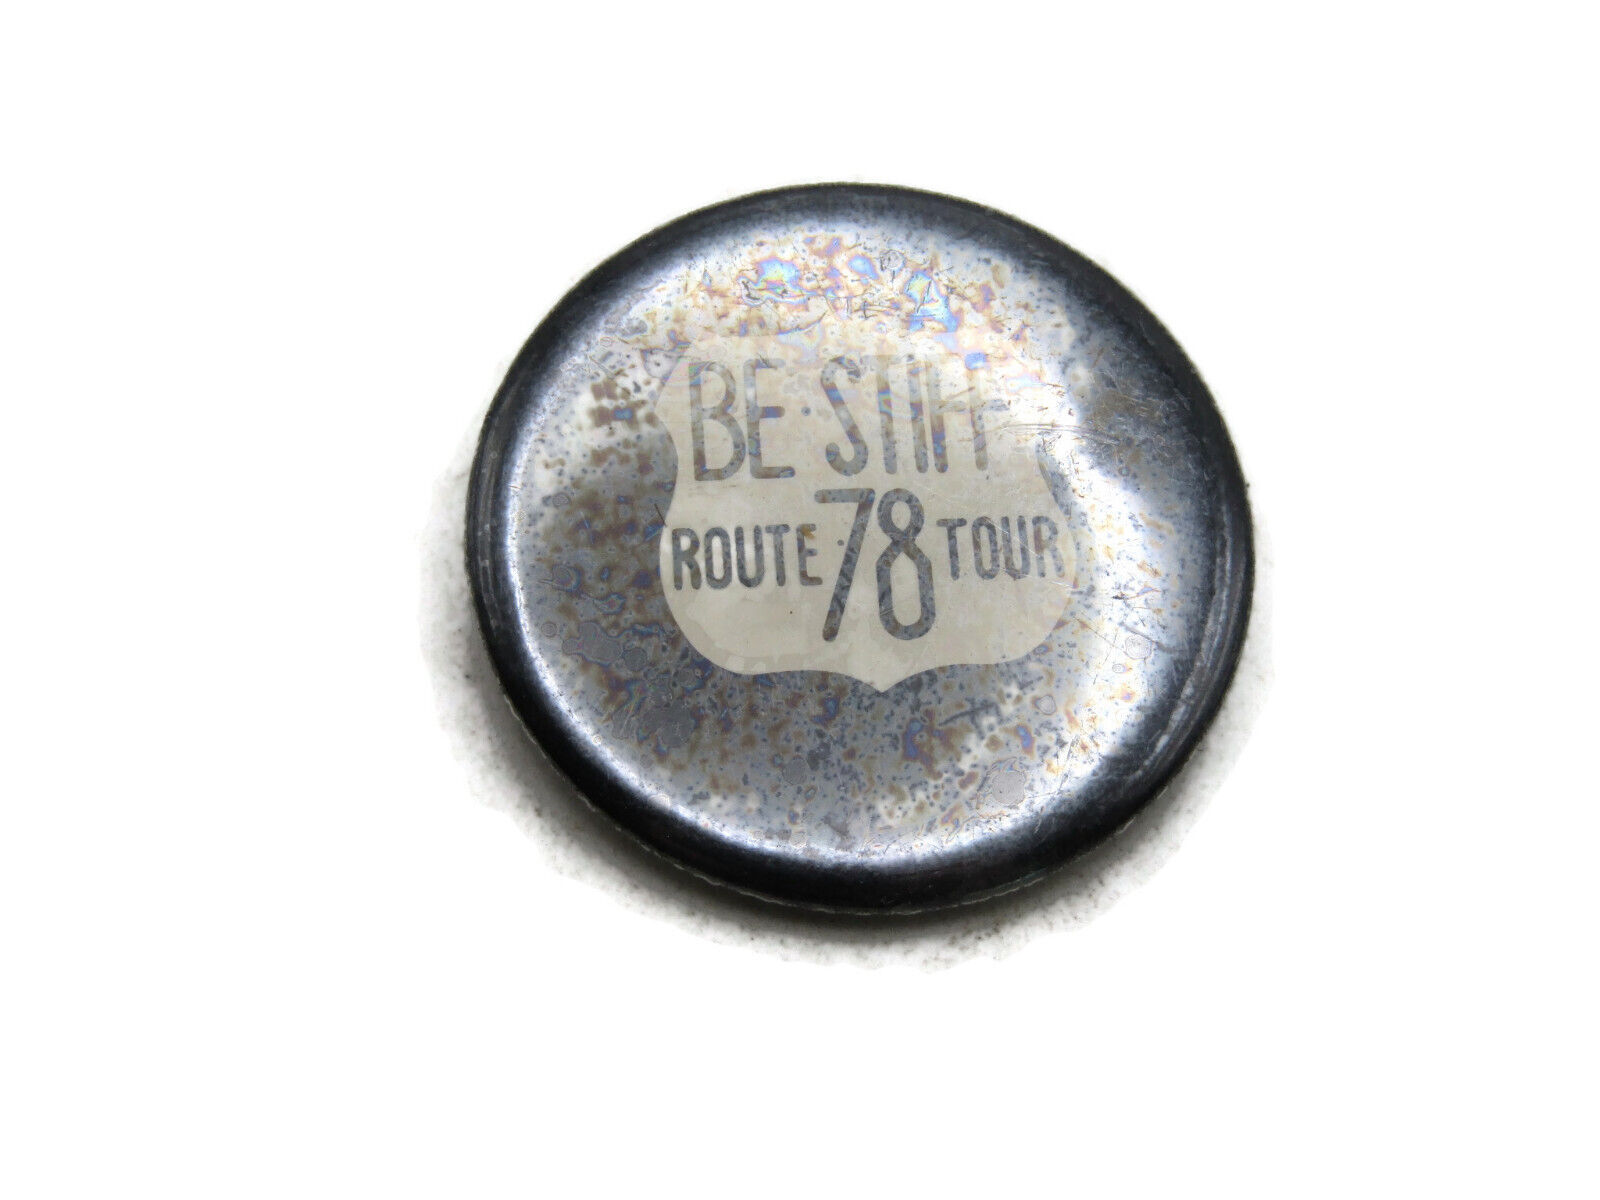 Be Stiff Route 78 Tour Lettered Pin Black Background